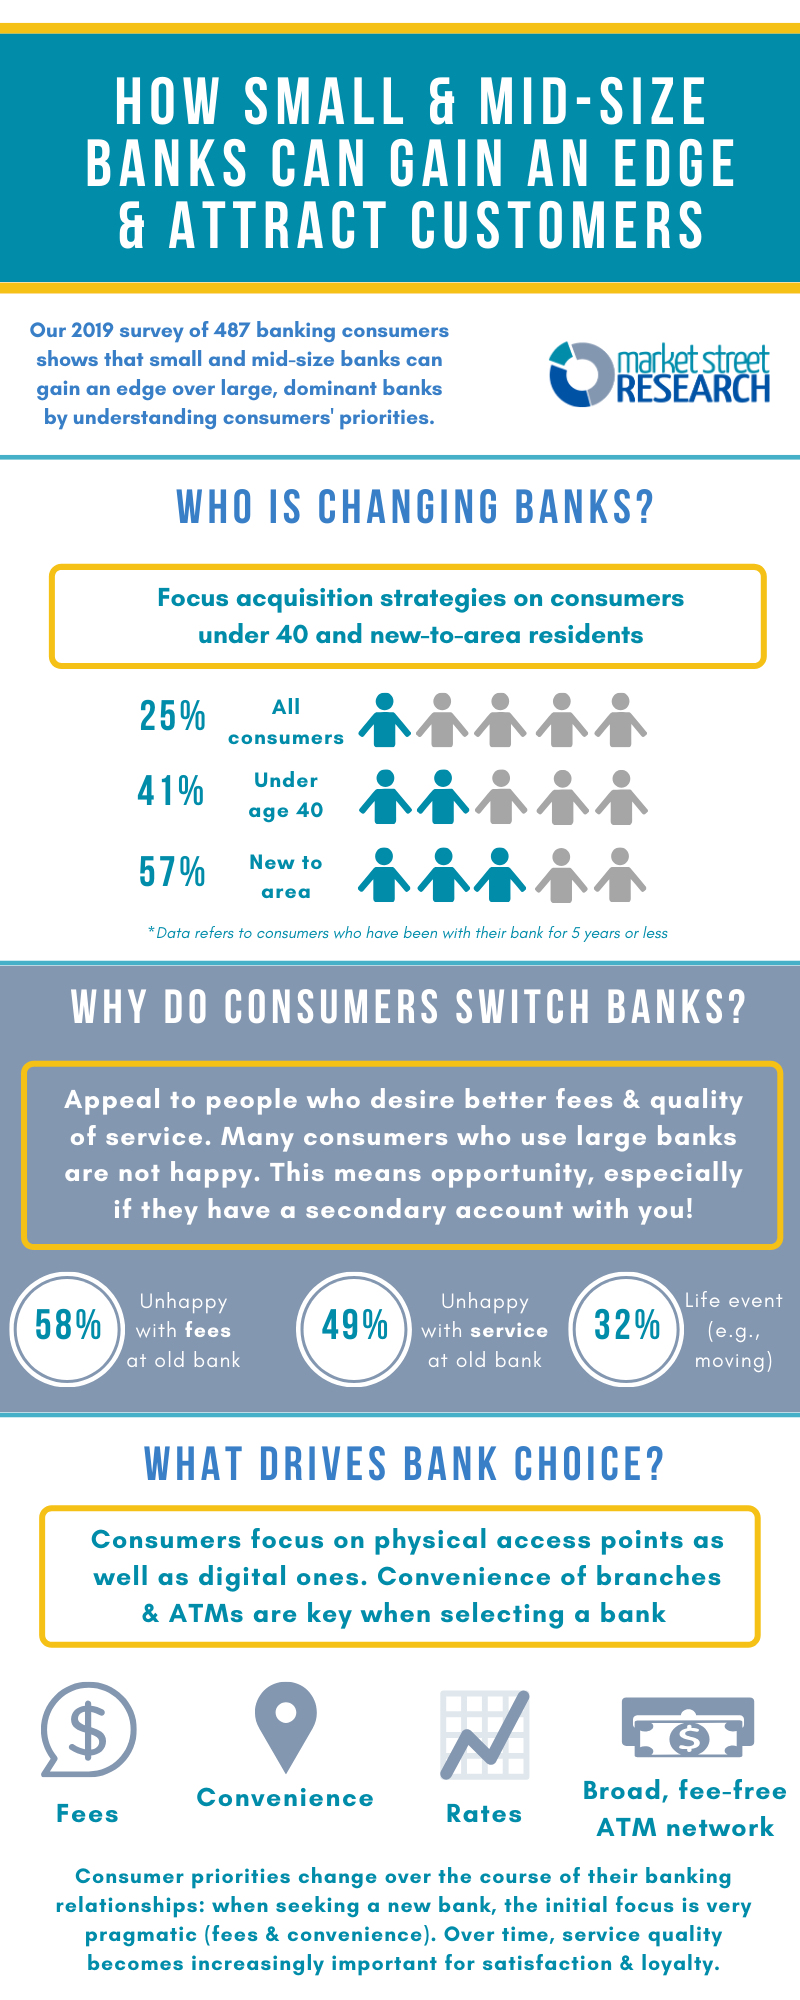 Page 1 of Banking Landscape Infographic, covering consumers who change banks, and what drives choice